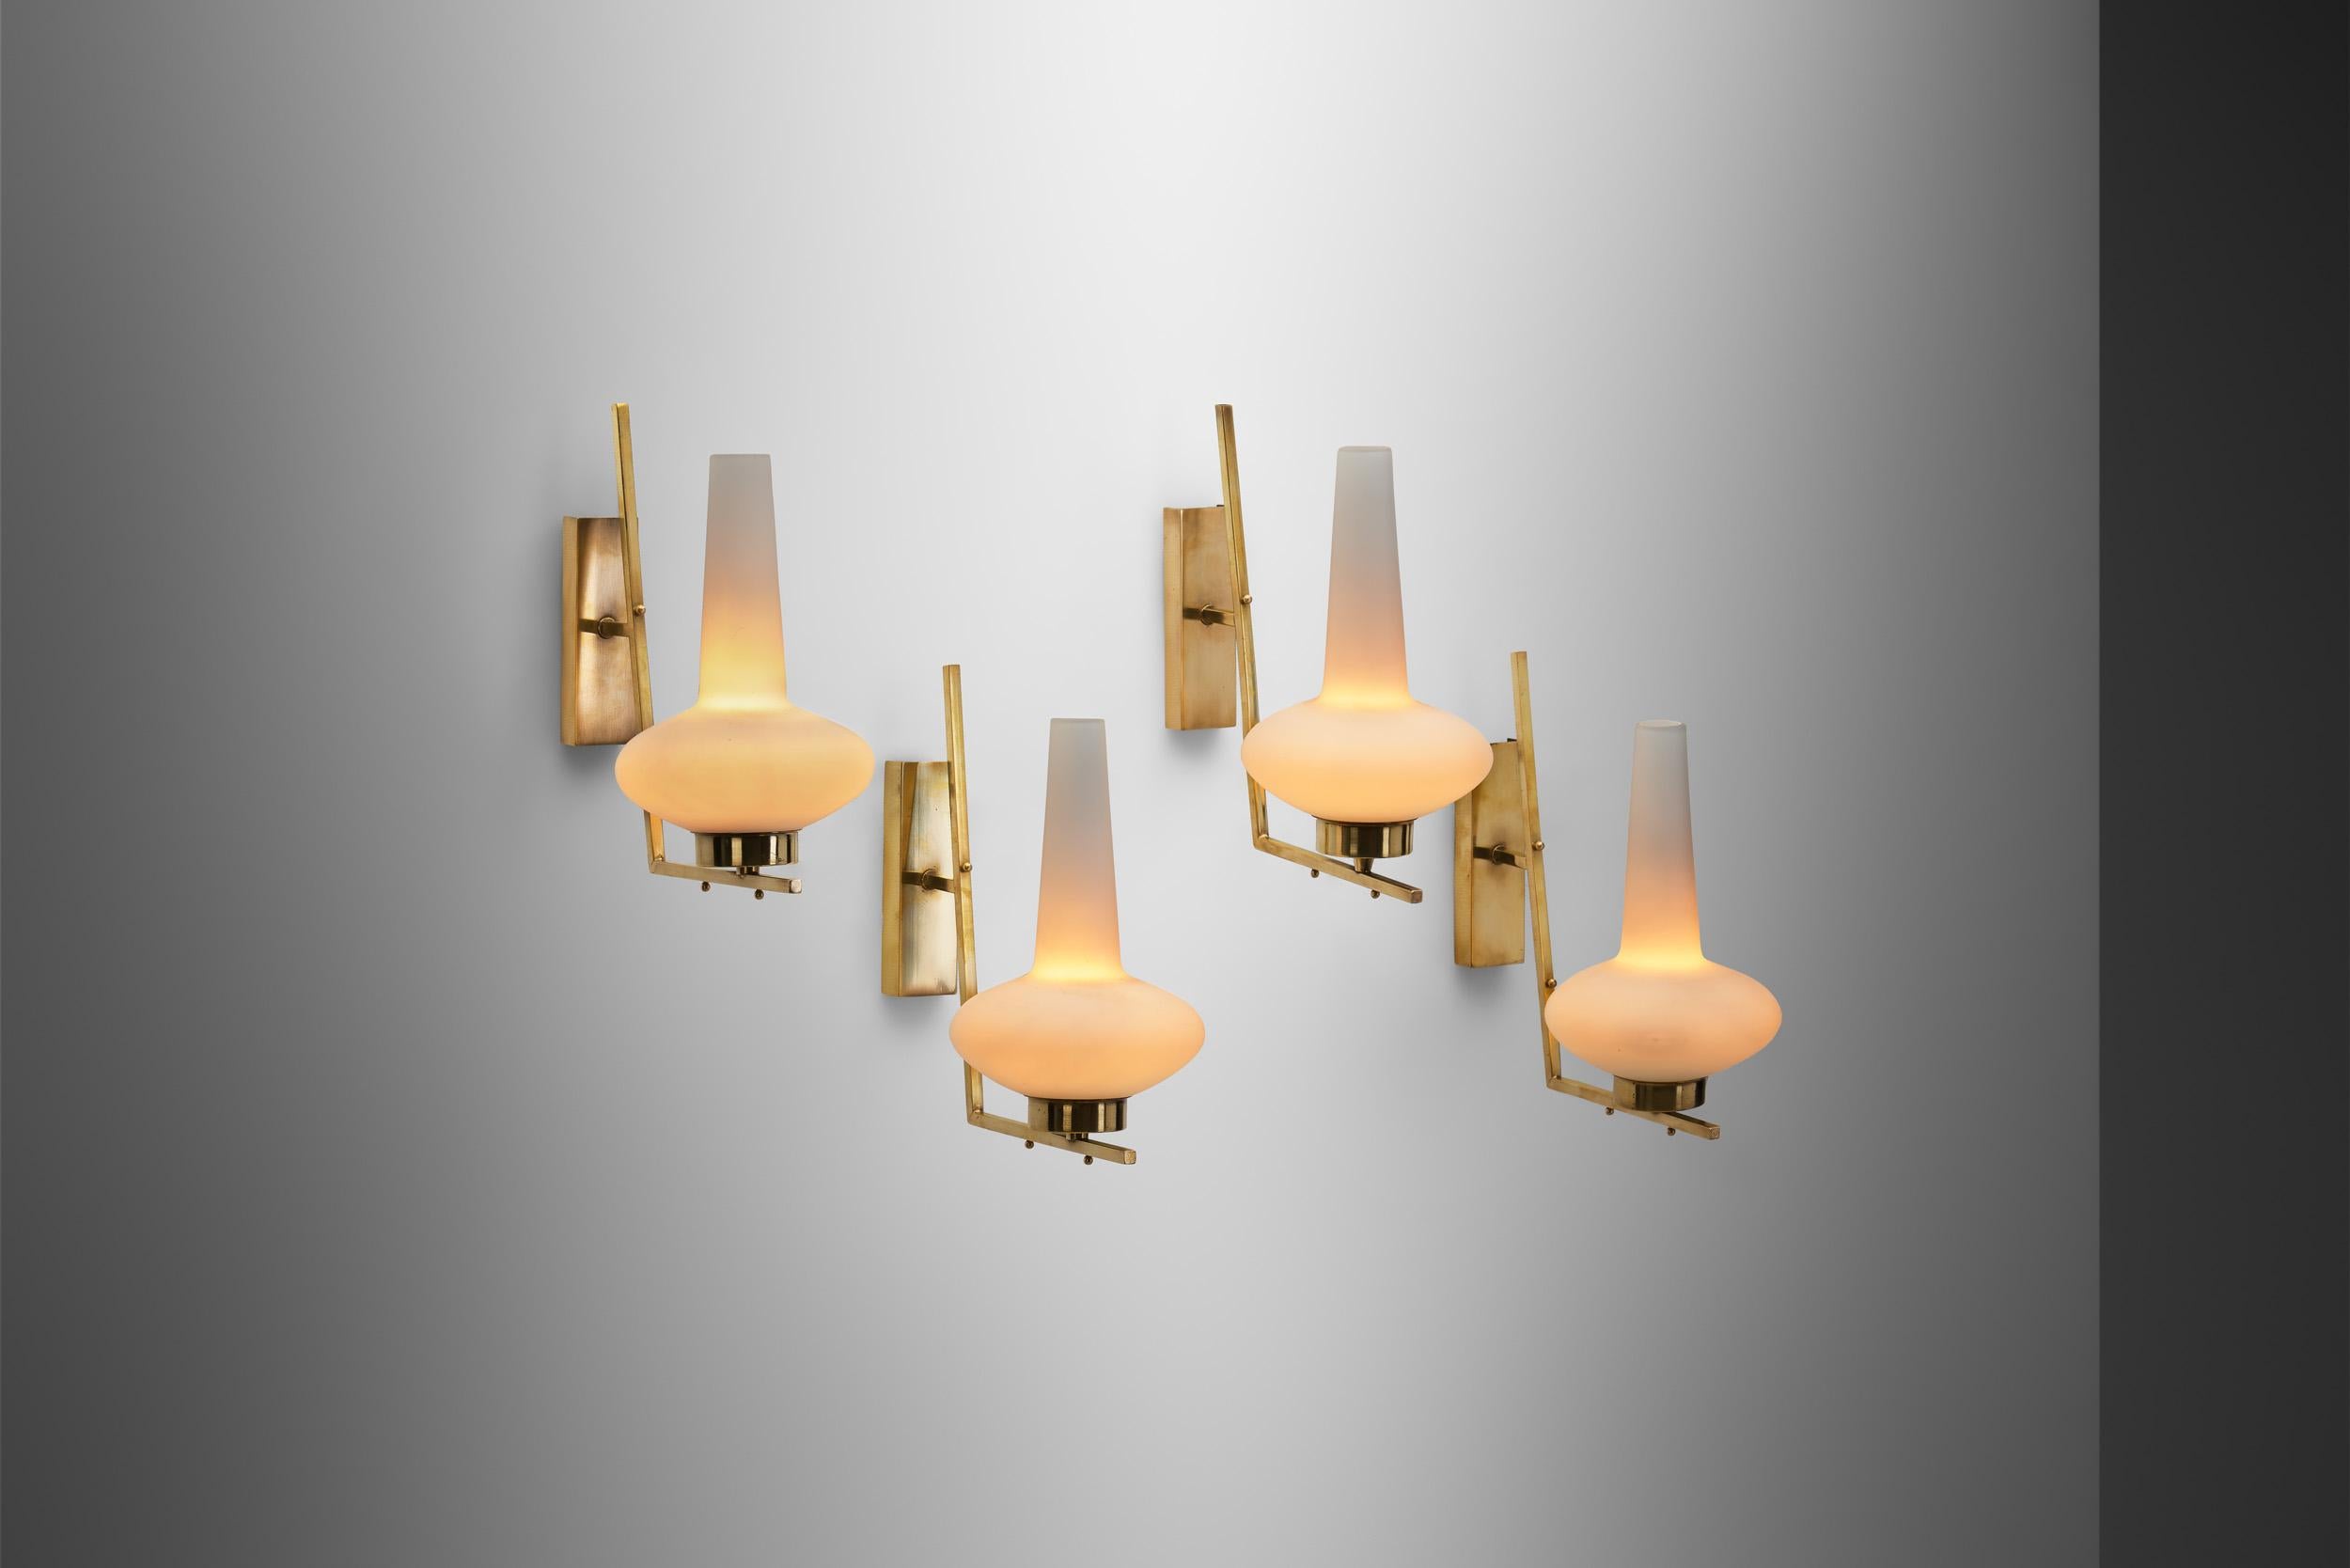 Italian mid-20th century lighting design was infinitely captivating, featuring one-of-a-kind models crafted by renowned Italian designers such as Ettore Sottsass, Gio Ponti, Gavina and other internationally esteemed names. As these wall lamps show,